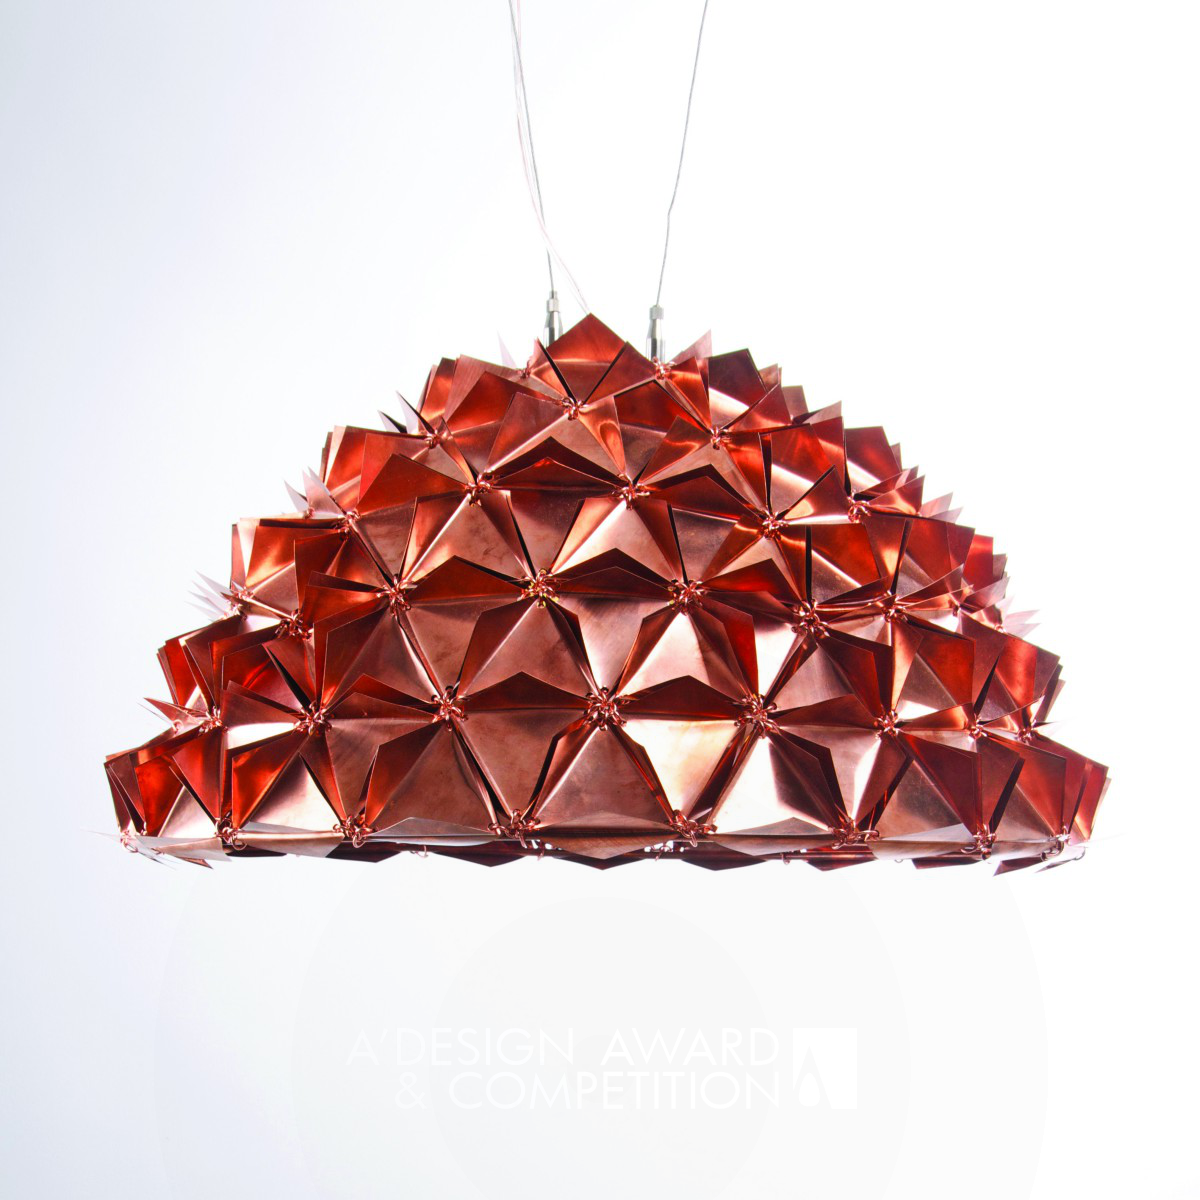 Faceted Tactile Light Series  Lights/ Lumieres by Avni Sejpal - Studio Avni